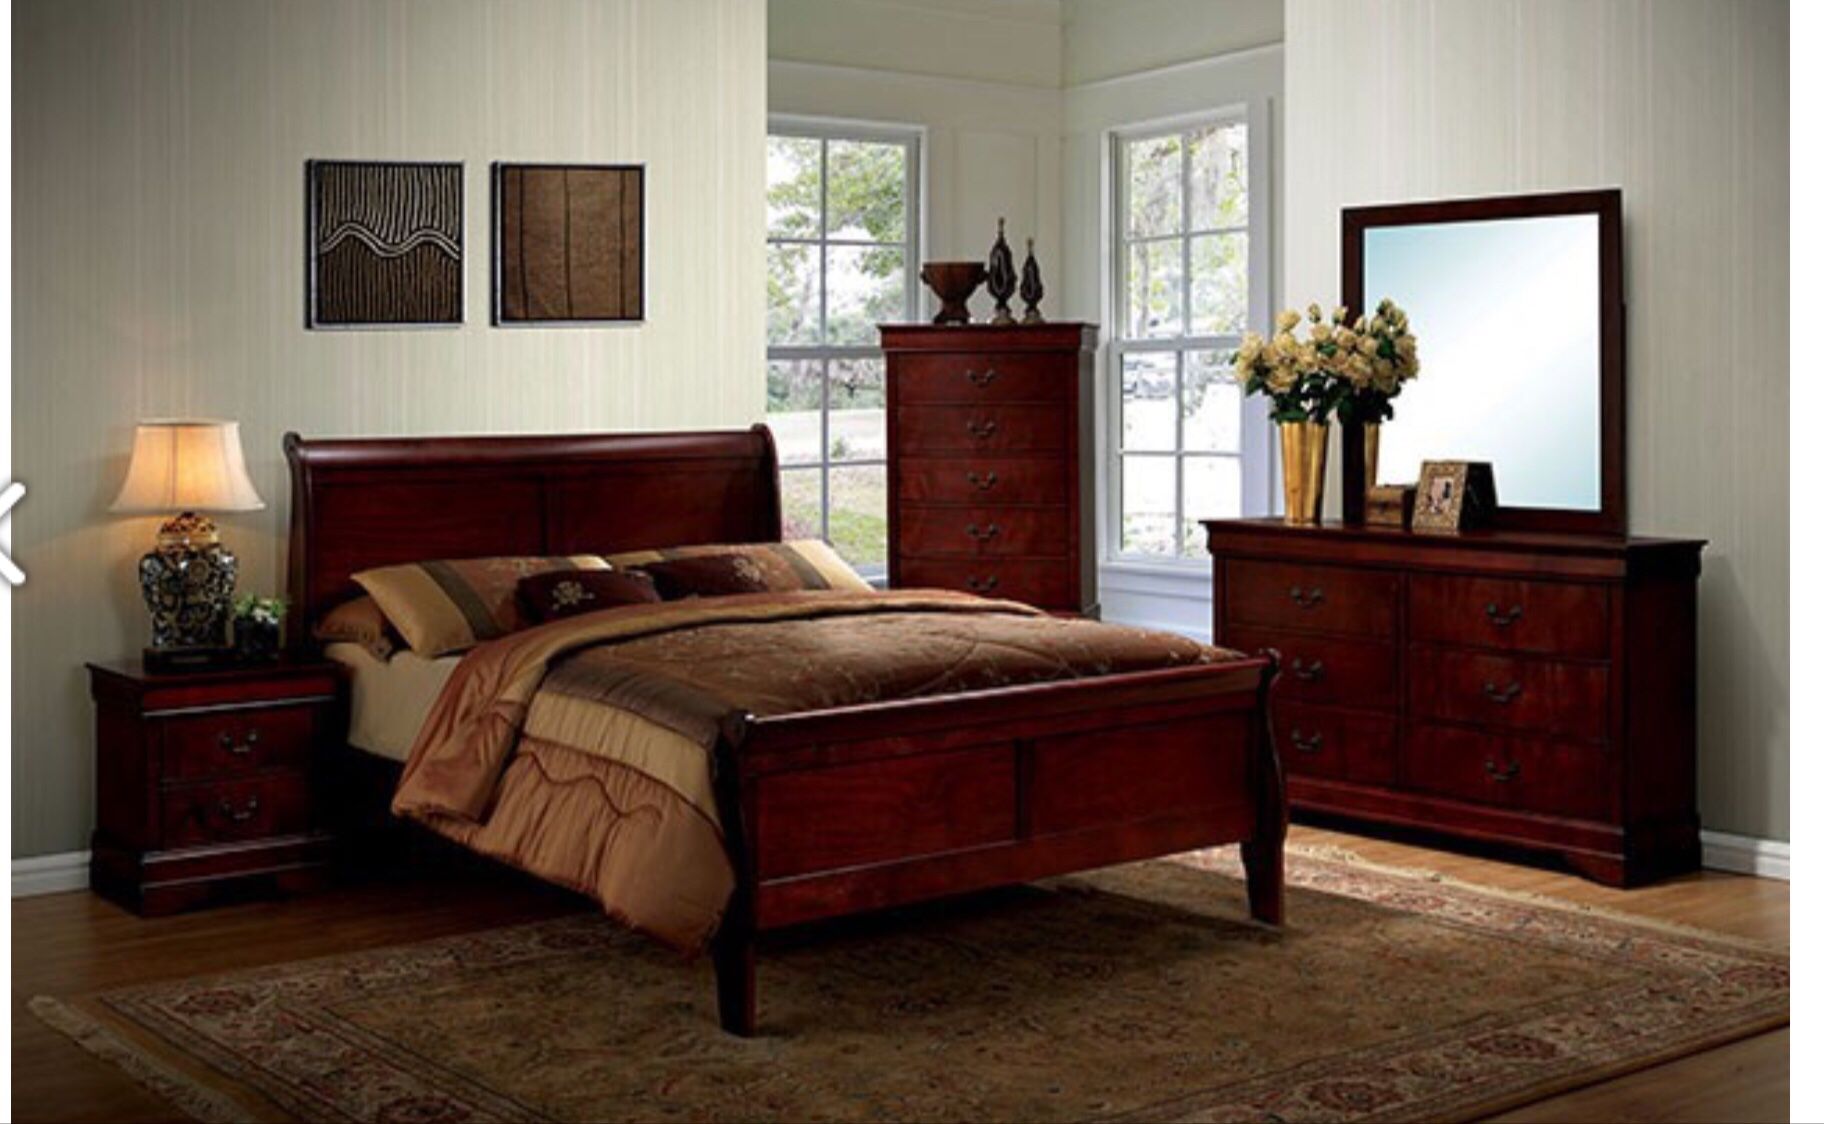 Brand new queen size bed set CHERRY COLOR